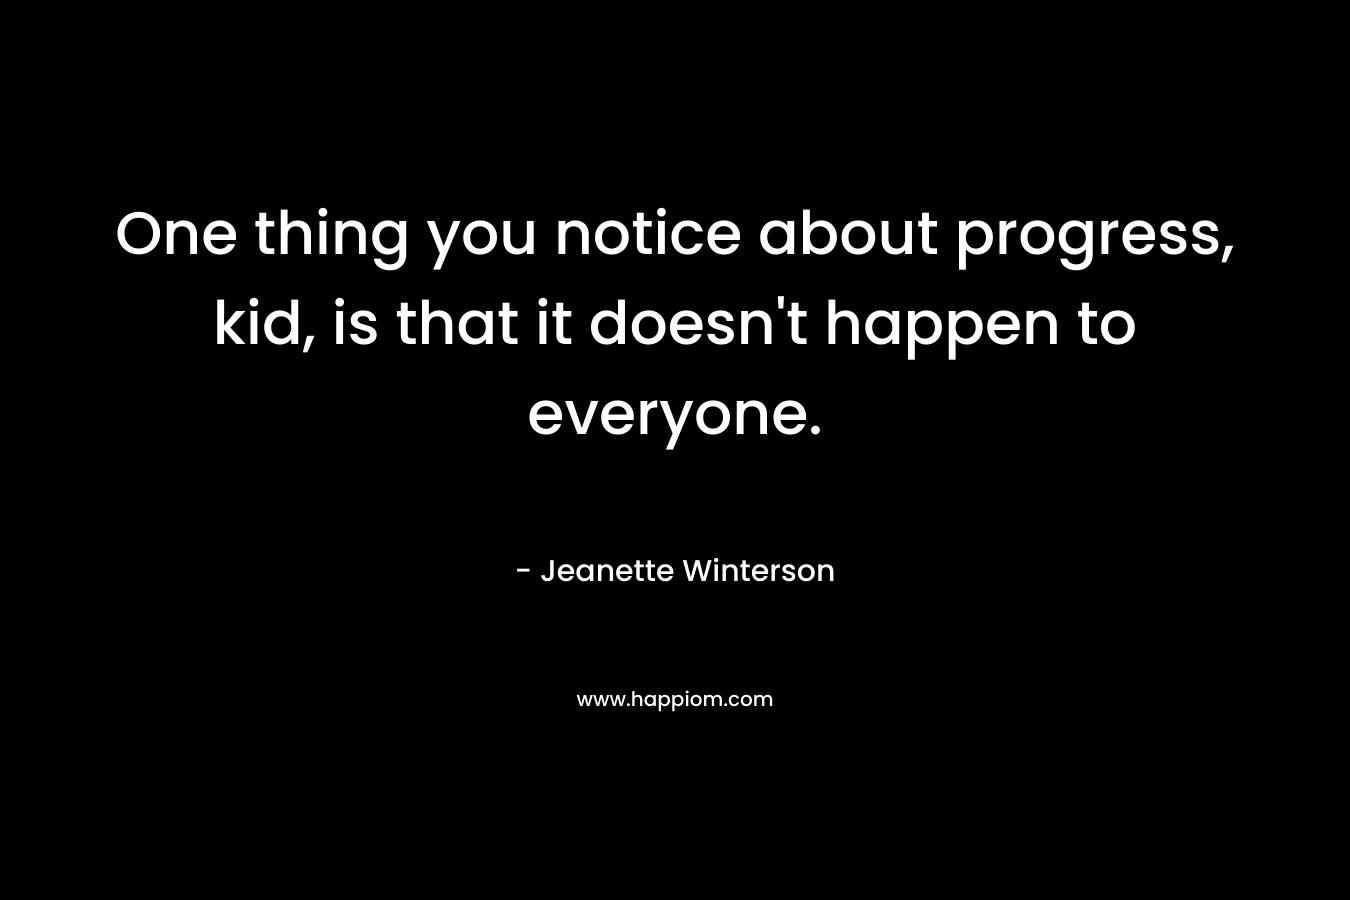 One thing you notice about progress, kid, is that it doesn’t happen to everyone. – Jeanette Winterson